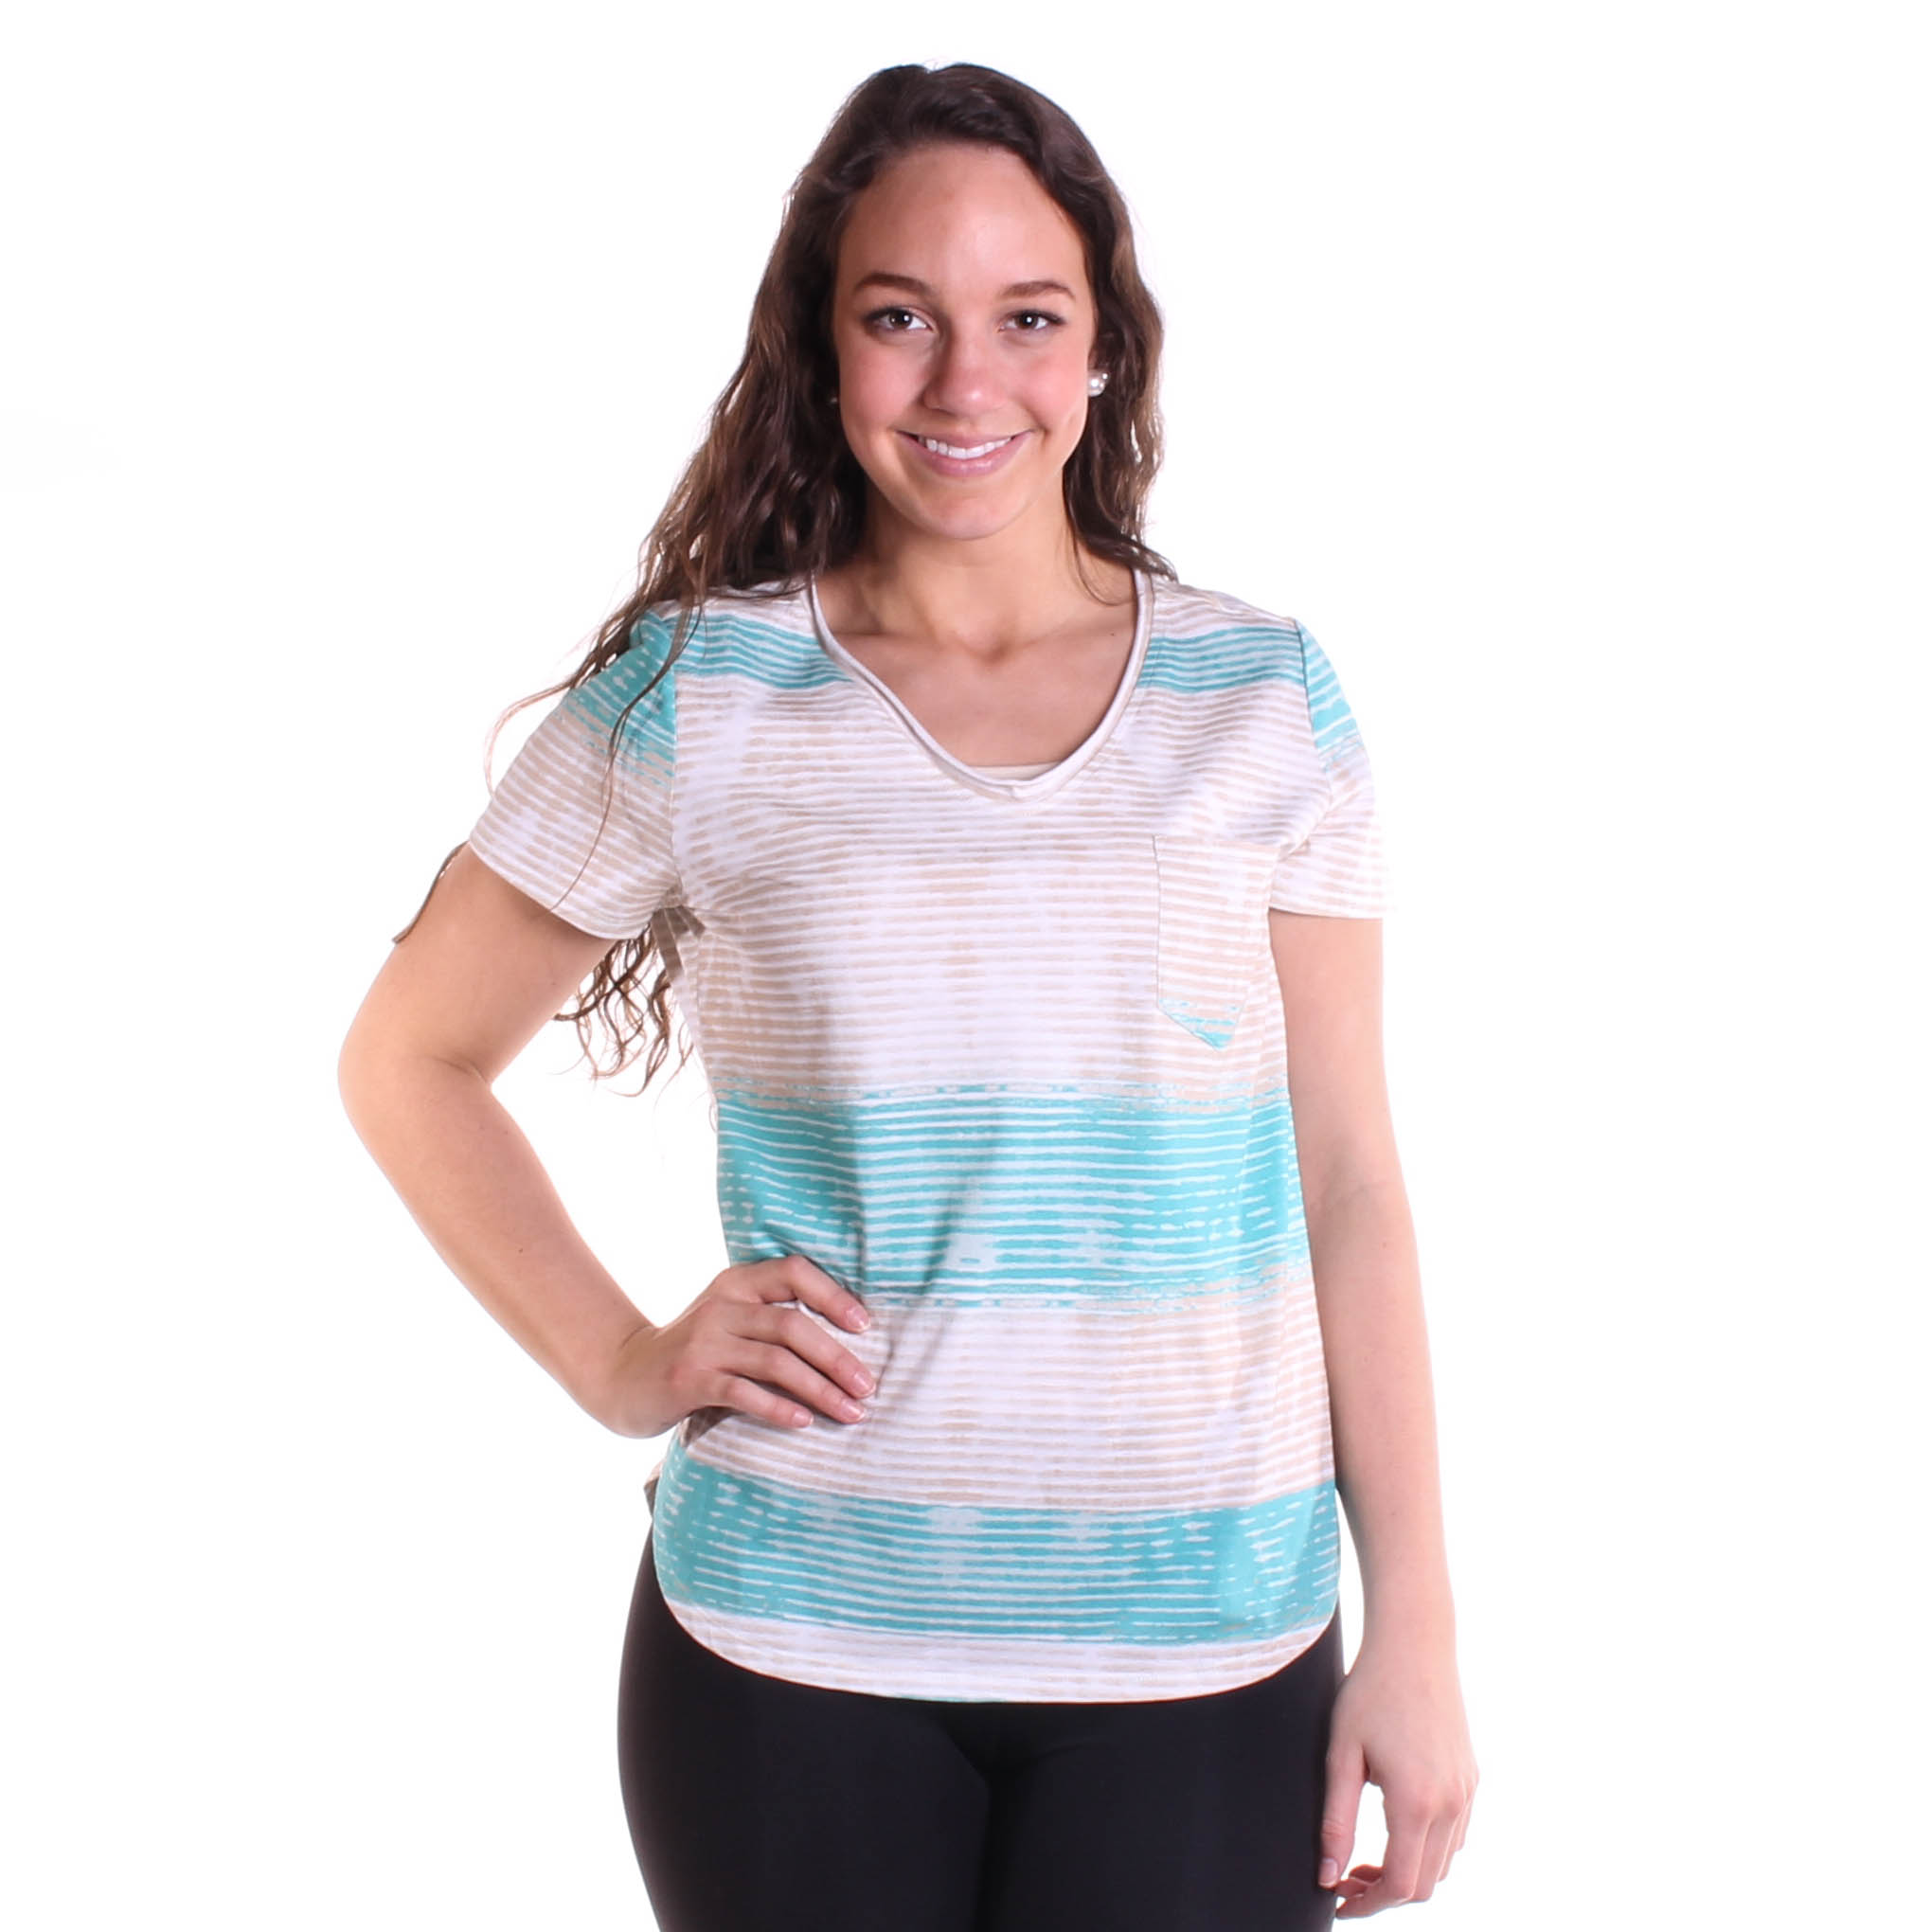 Tribal Women's Rolled Neck Top